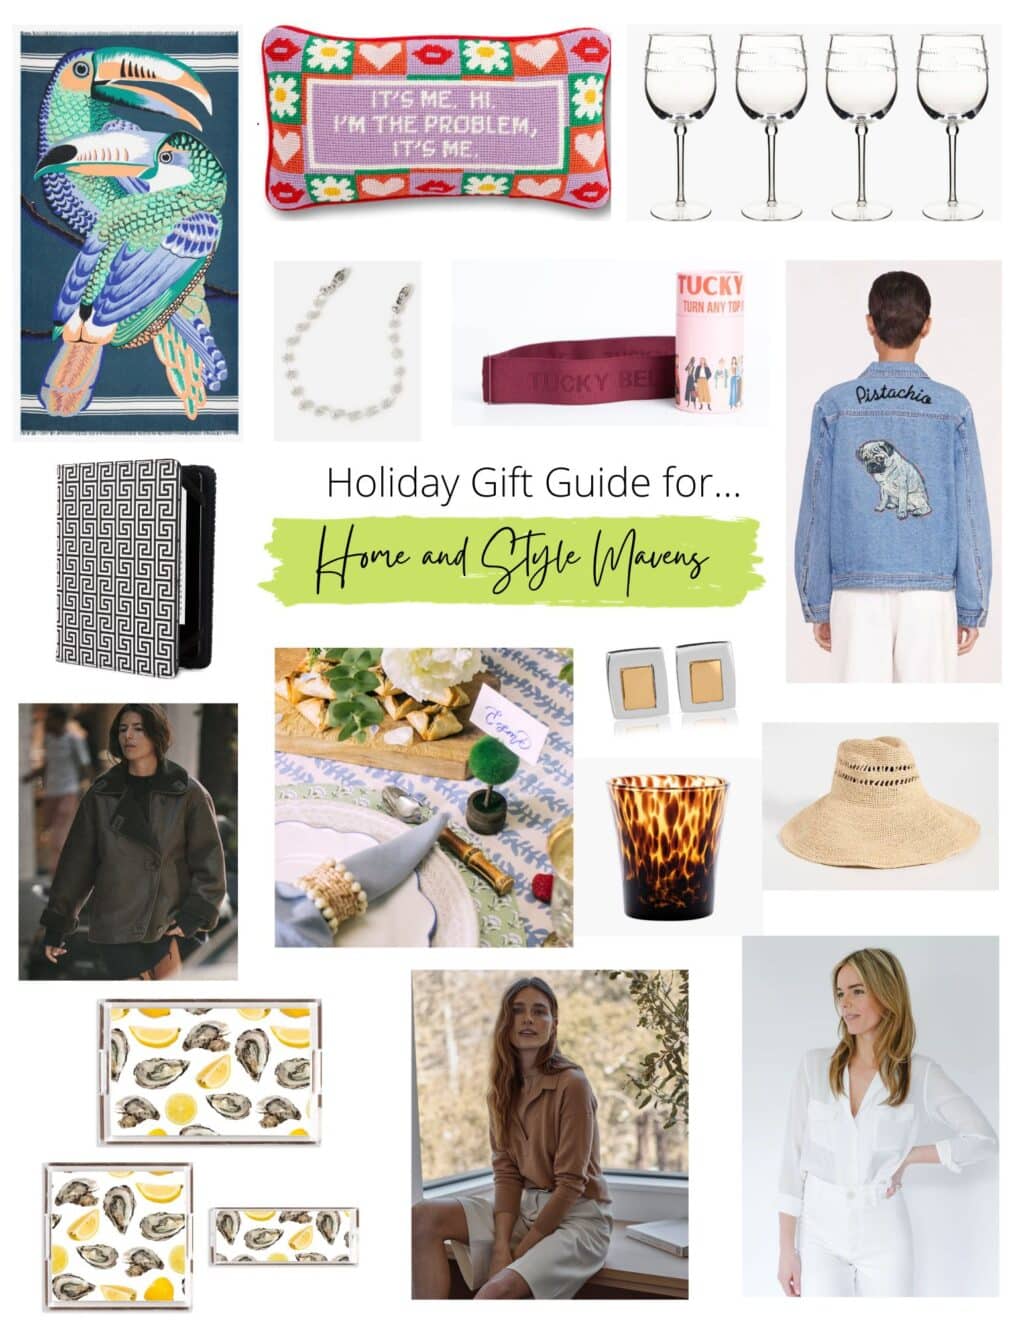 Collaged image of gift ideas for home decor and style enthusiasts.